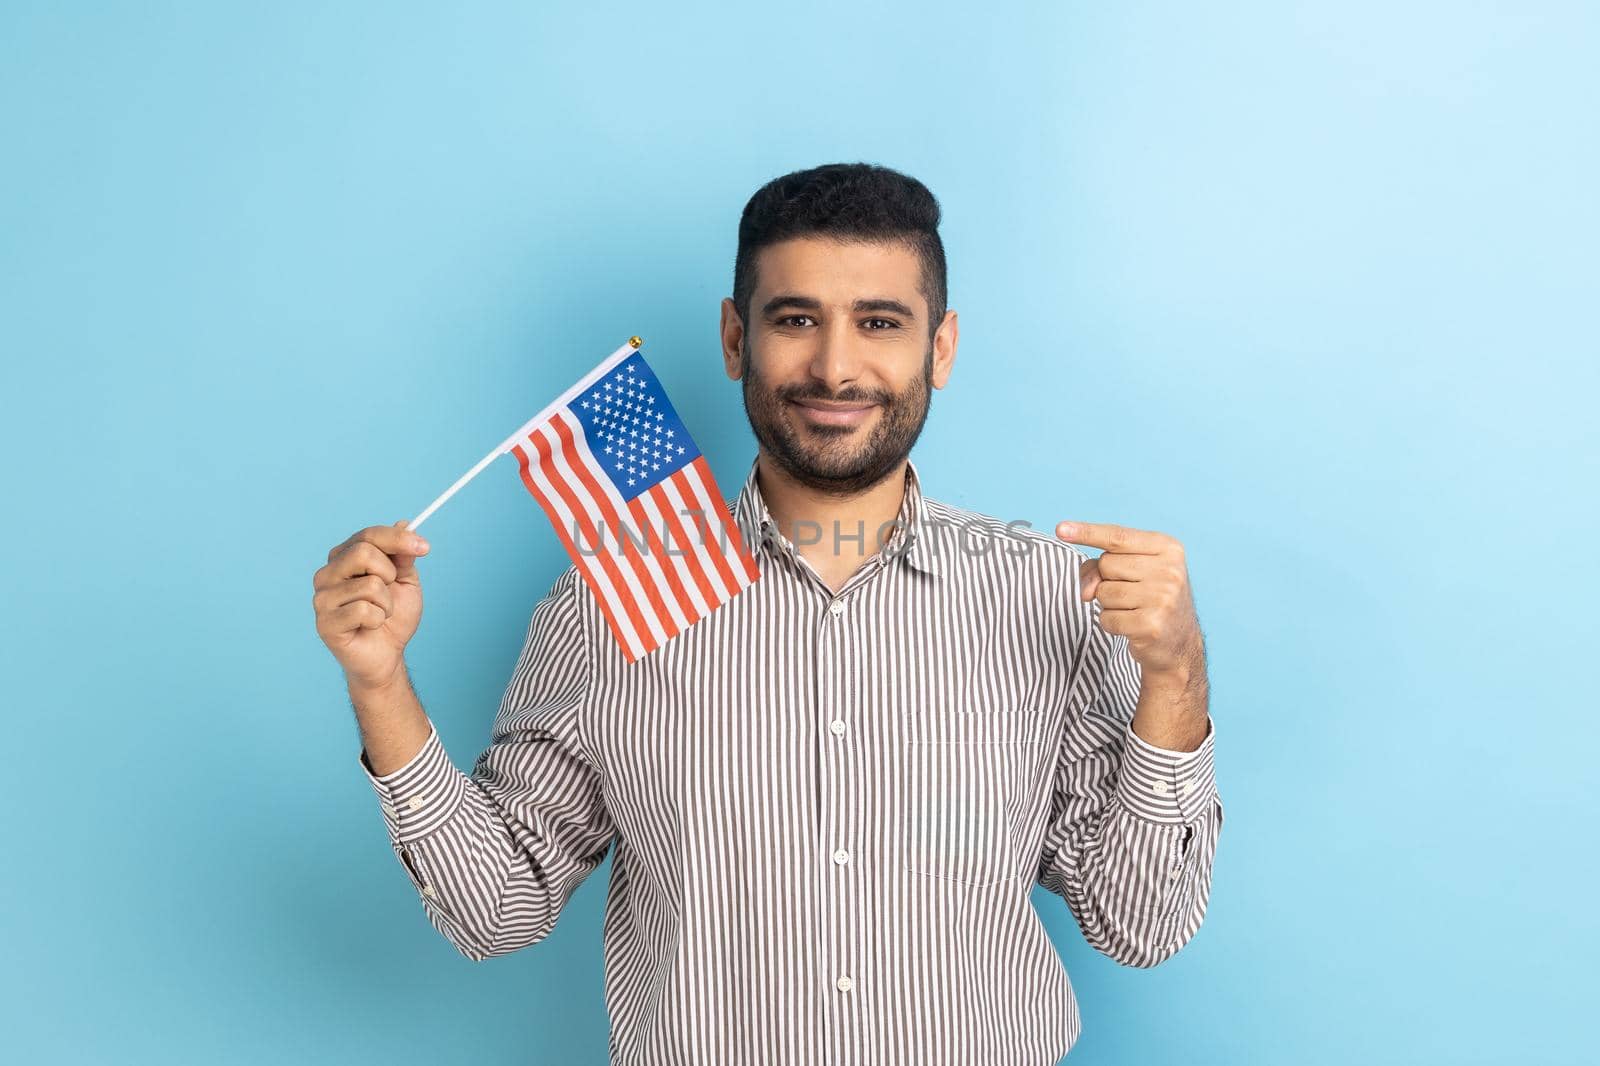 Portrait of happy positive man with beard standing and pointing at american flag, celebrating national holiday, wearing striped shirt. Indoor studio shot isolated on blue background.